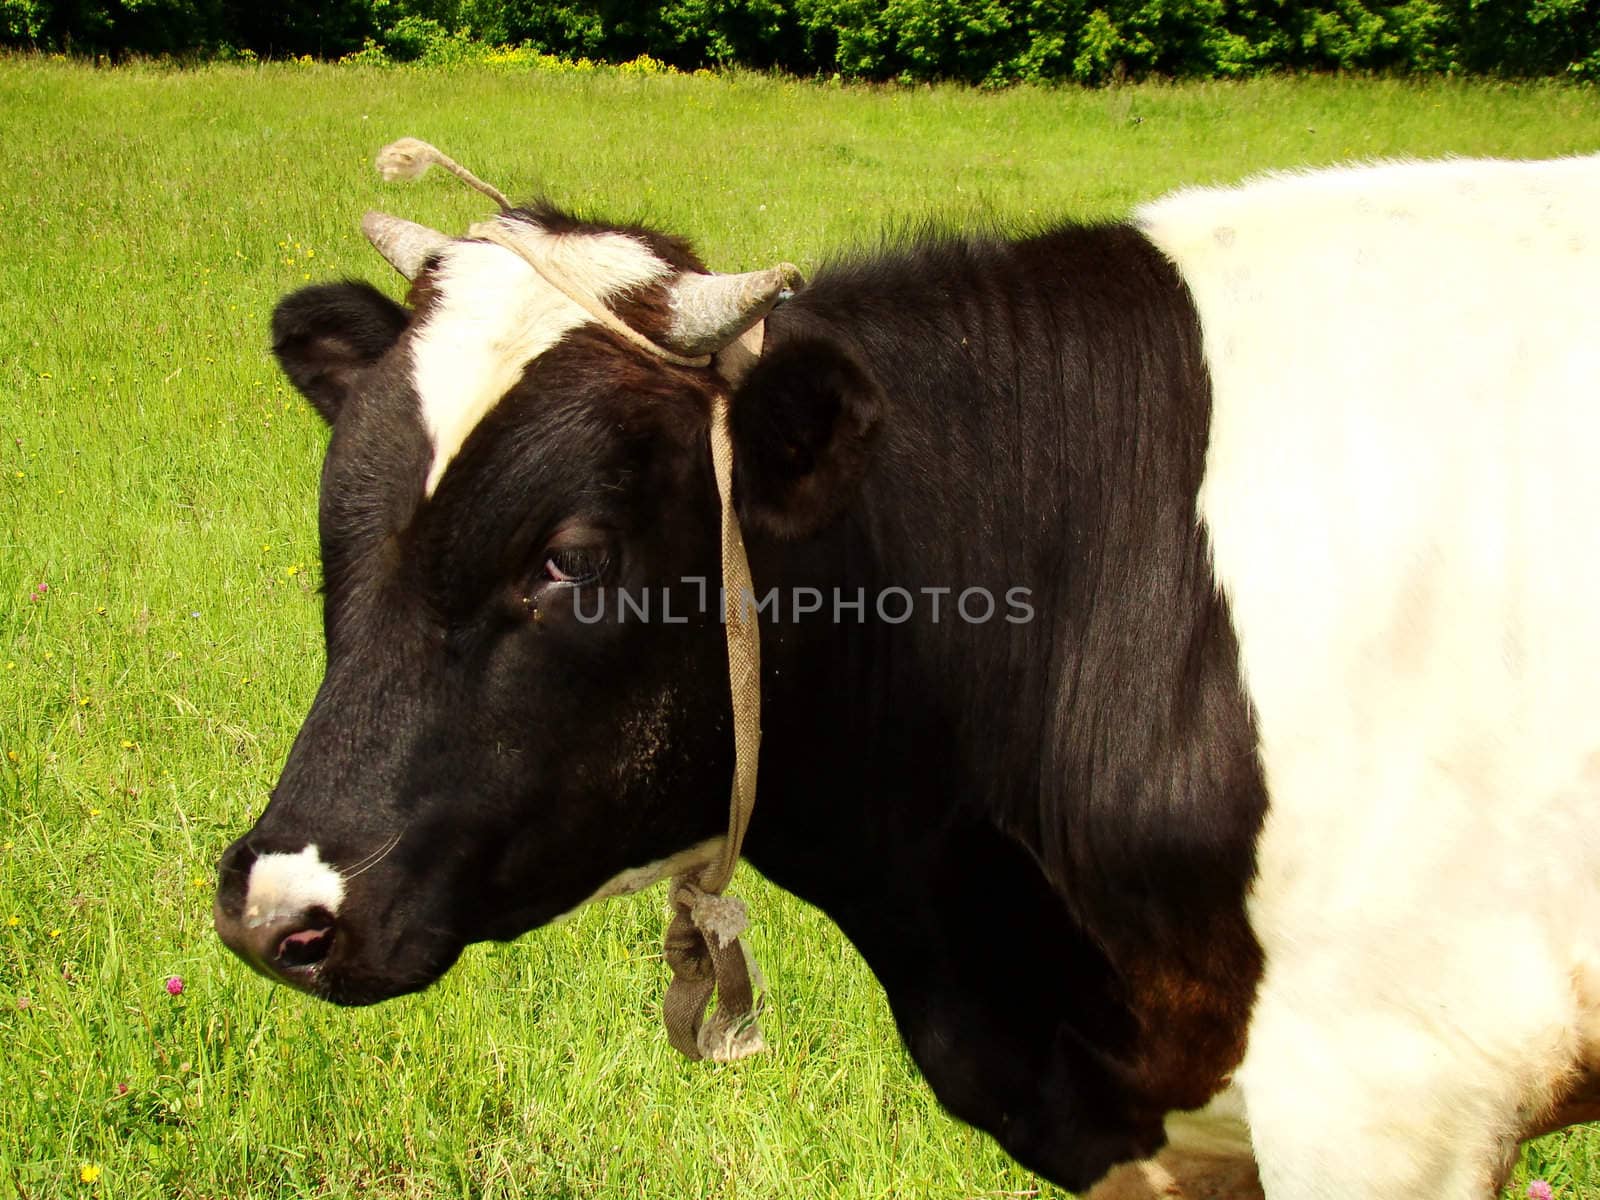 A black and white milk cow with a bright blue sky at the background